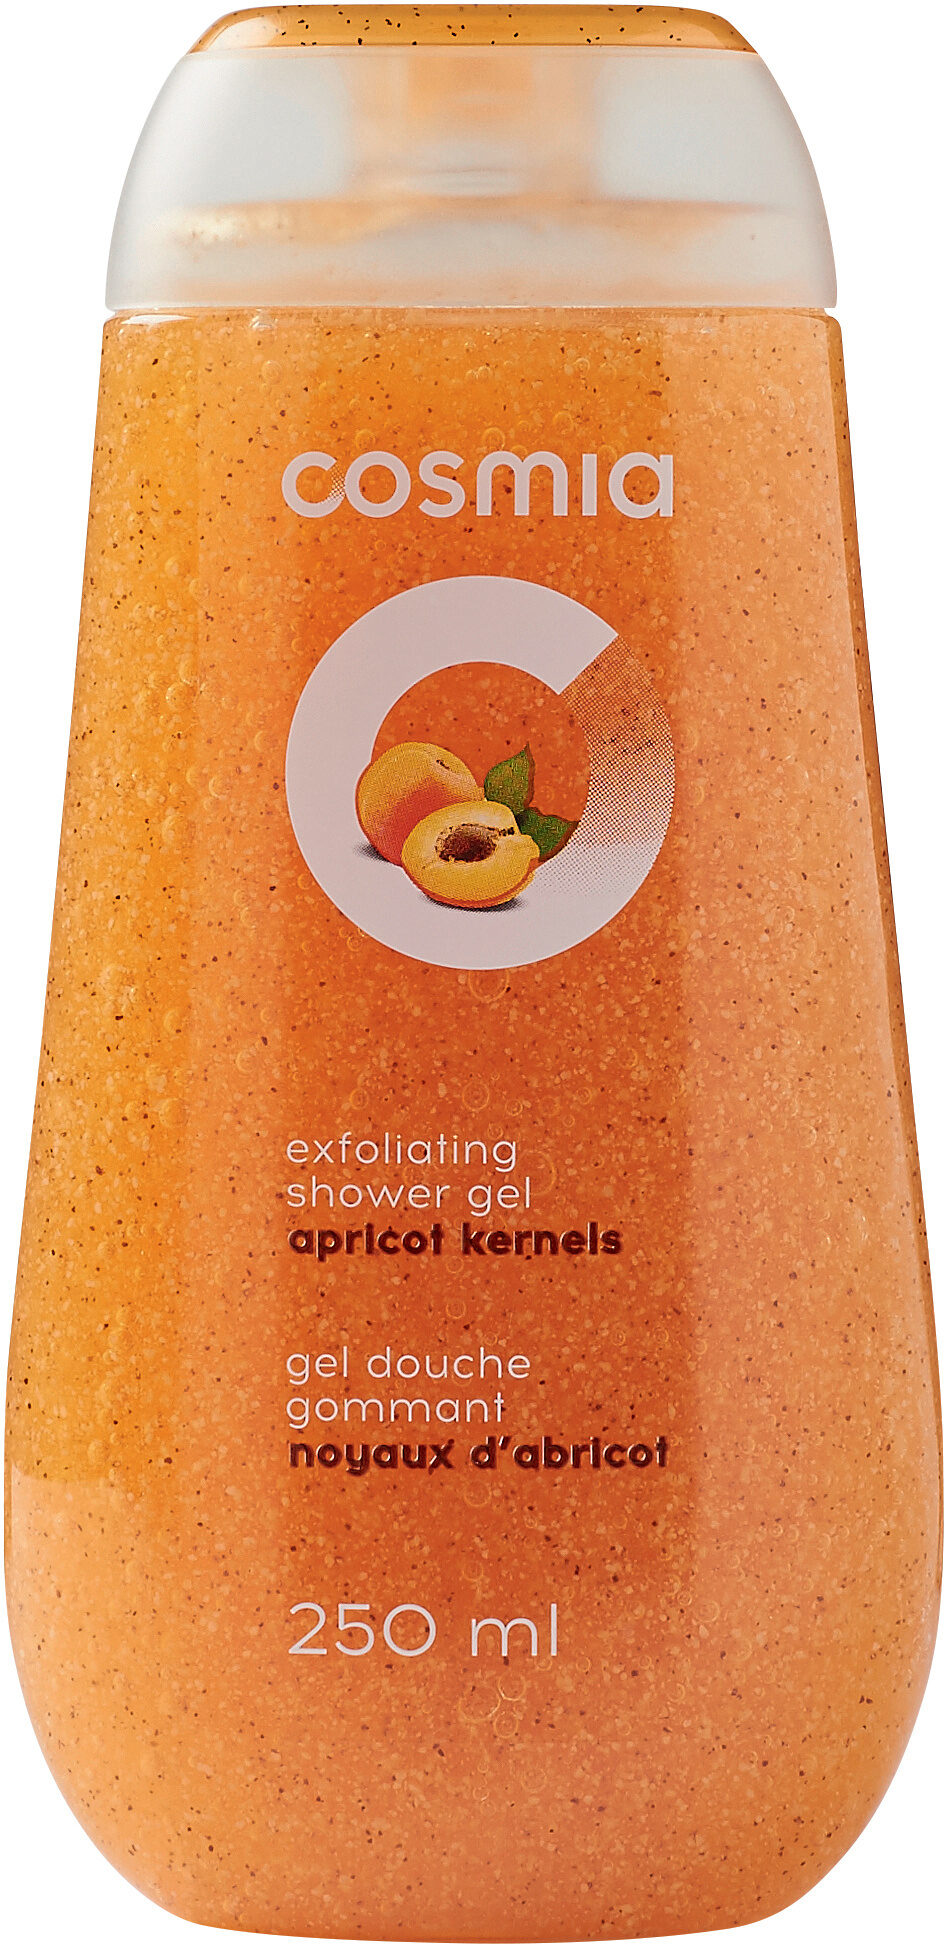 Gel douche gommant - Product - fr